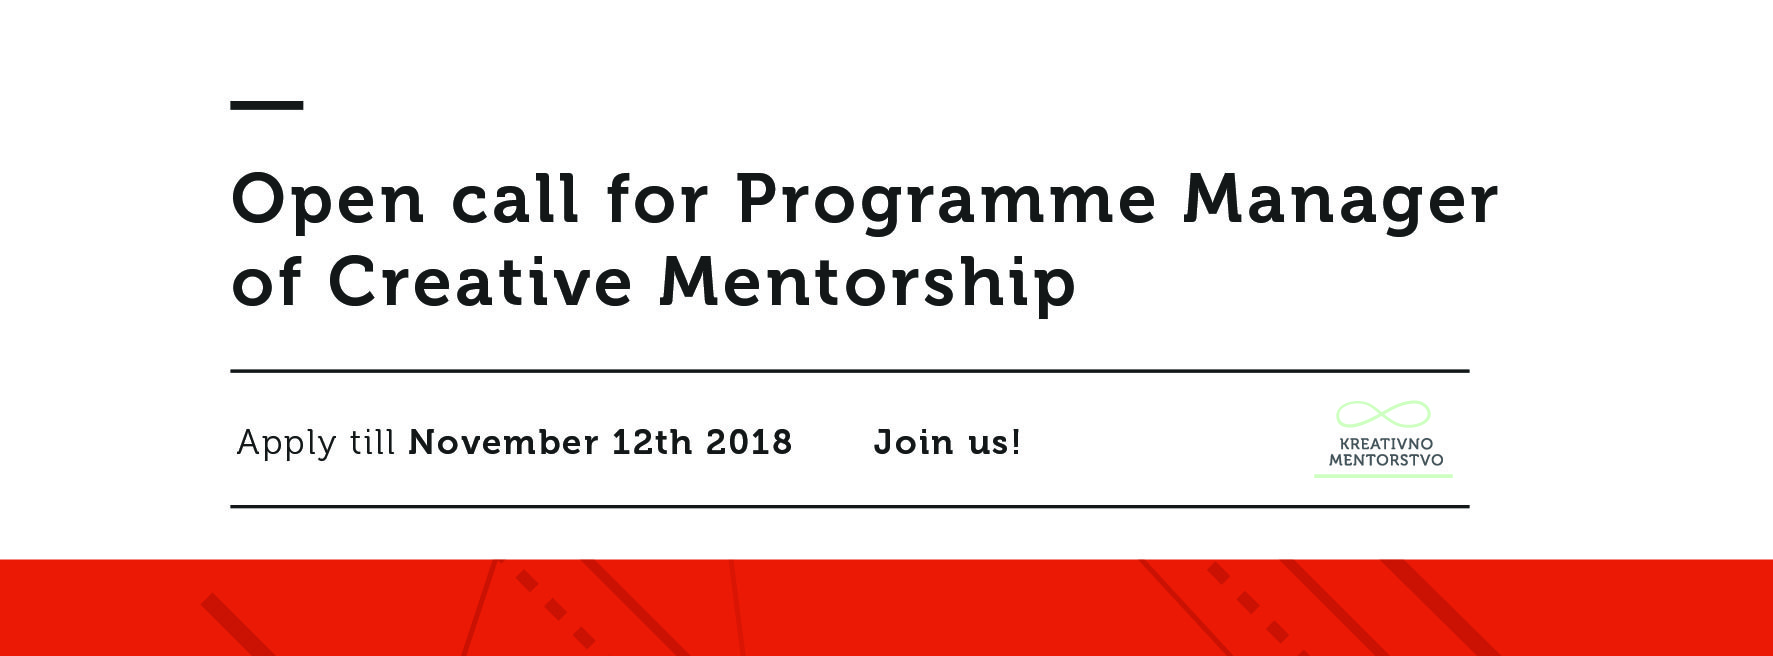 OPEN CALL FOR MANAGER OF MENTORSHIP - Kreativno